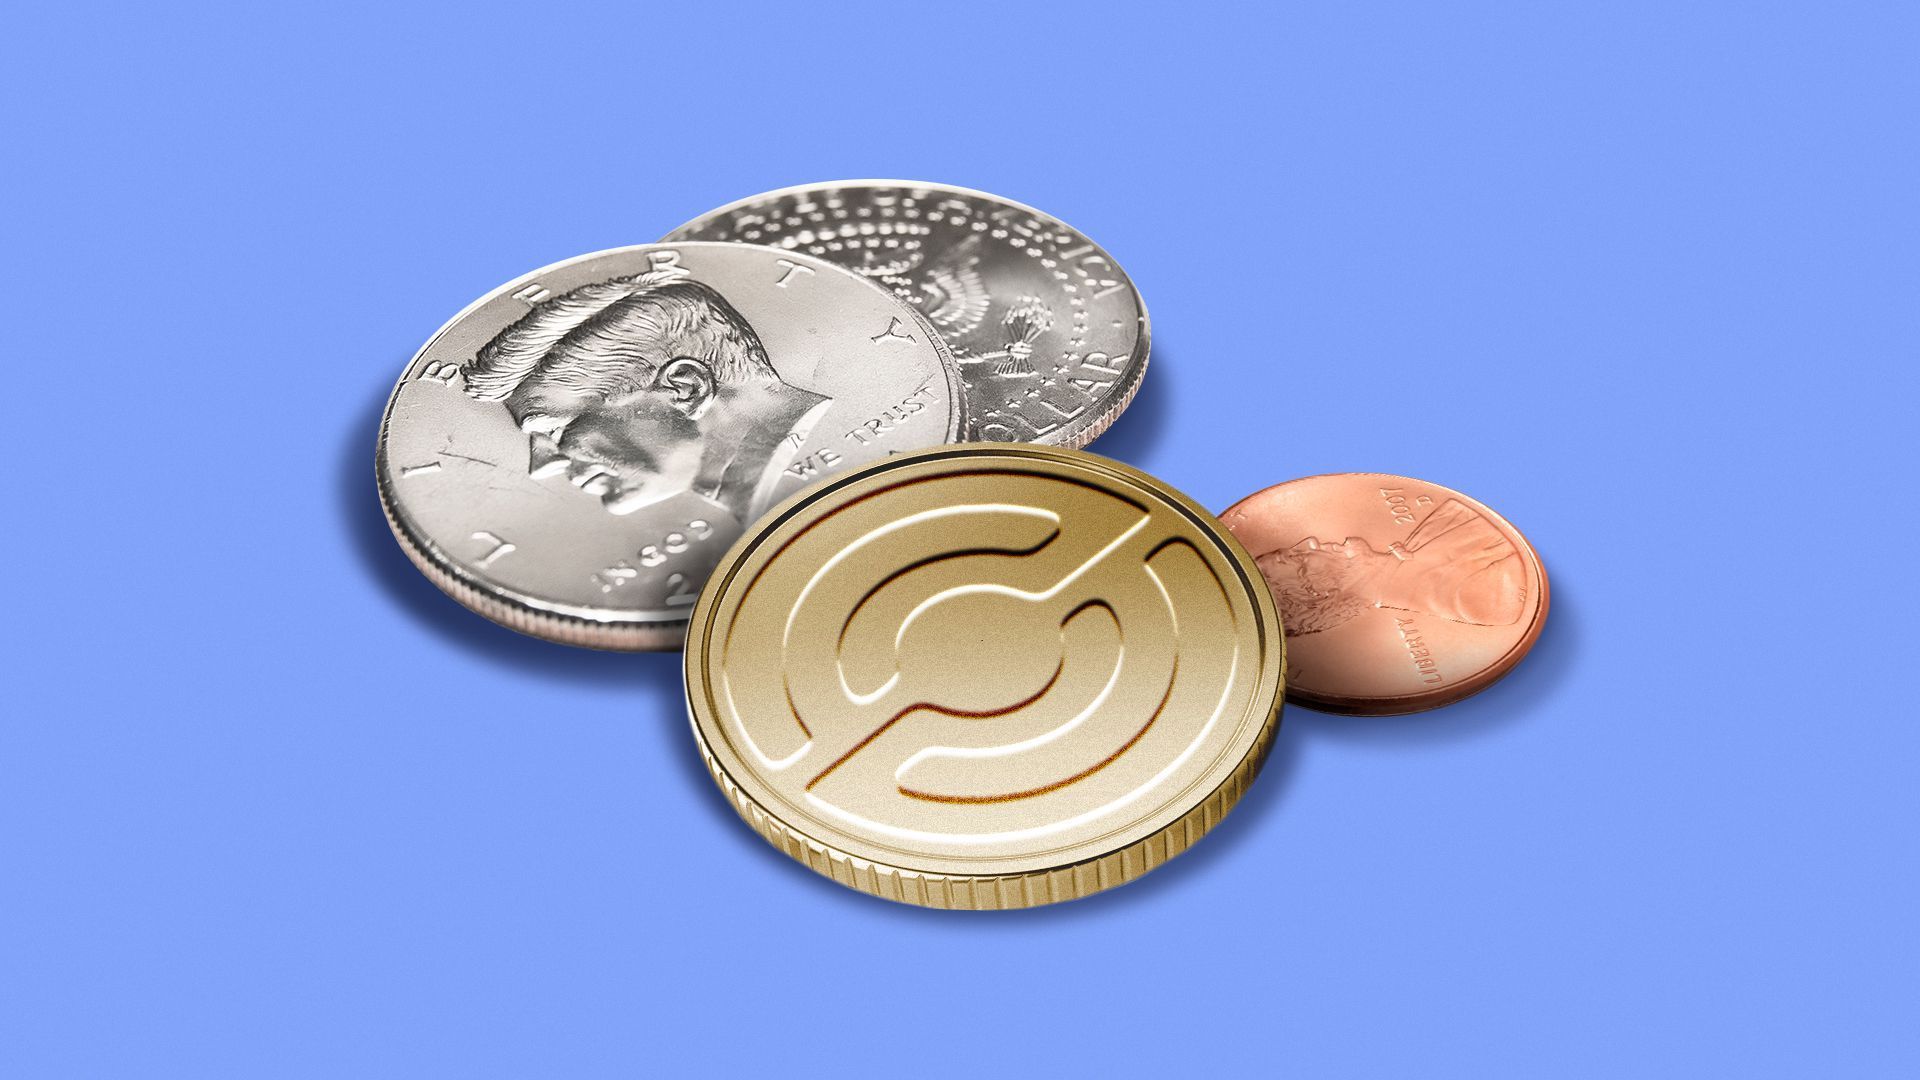 Illustration of U.S. coins and a coin with Circle's logo.